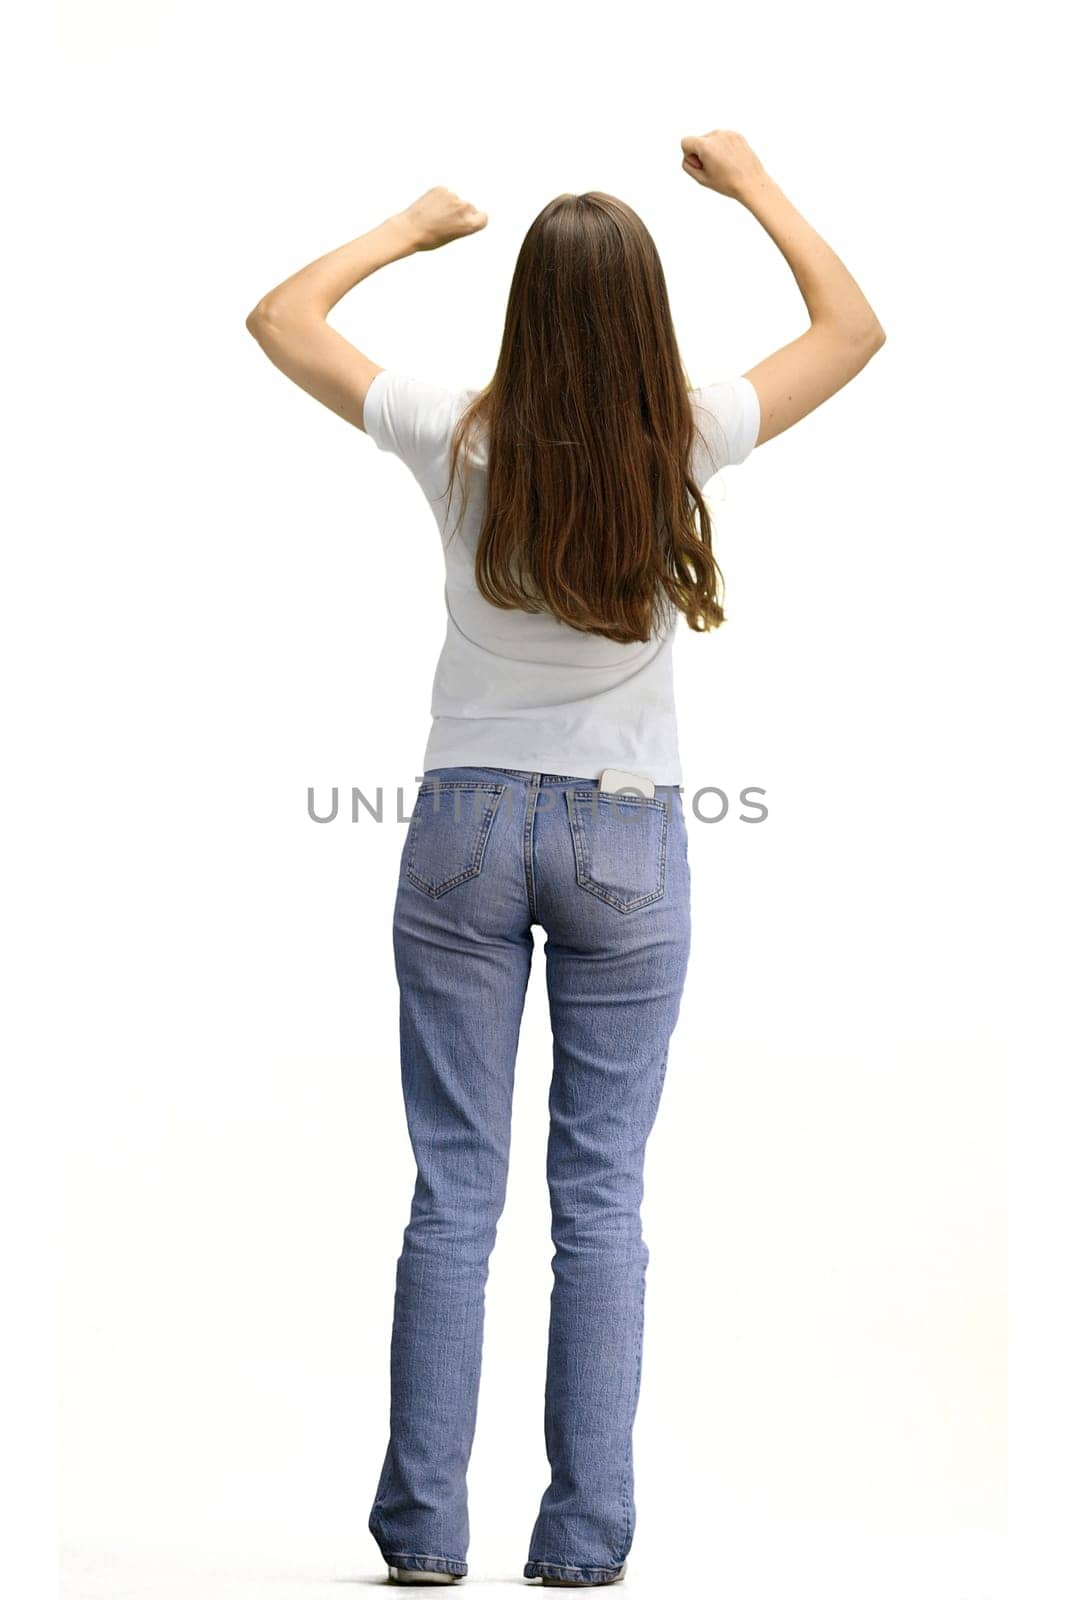 A woman, full-length, on a white background, raises her hands up by Prosto